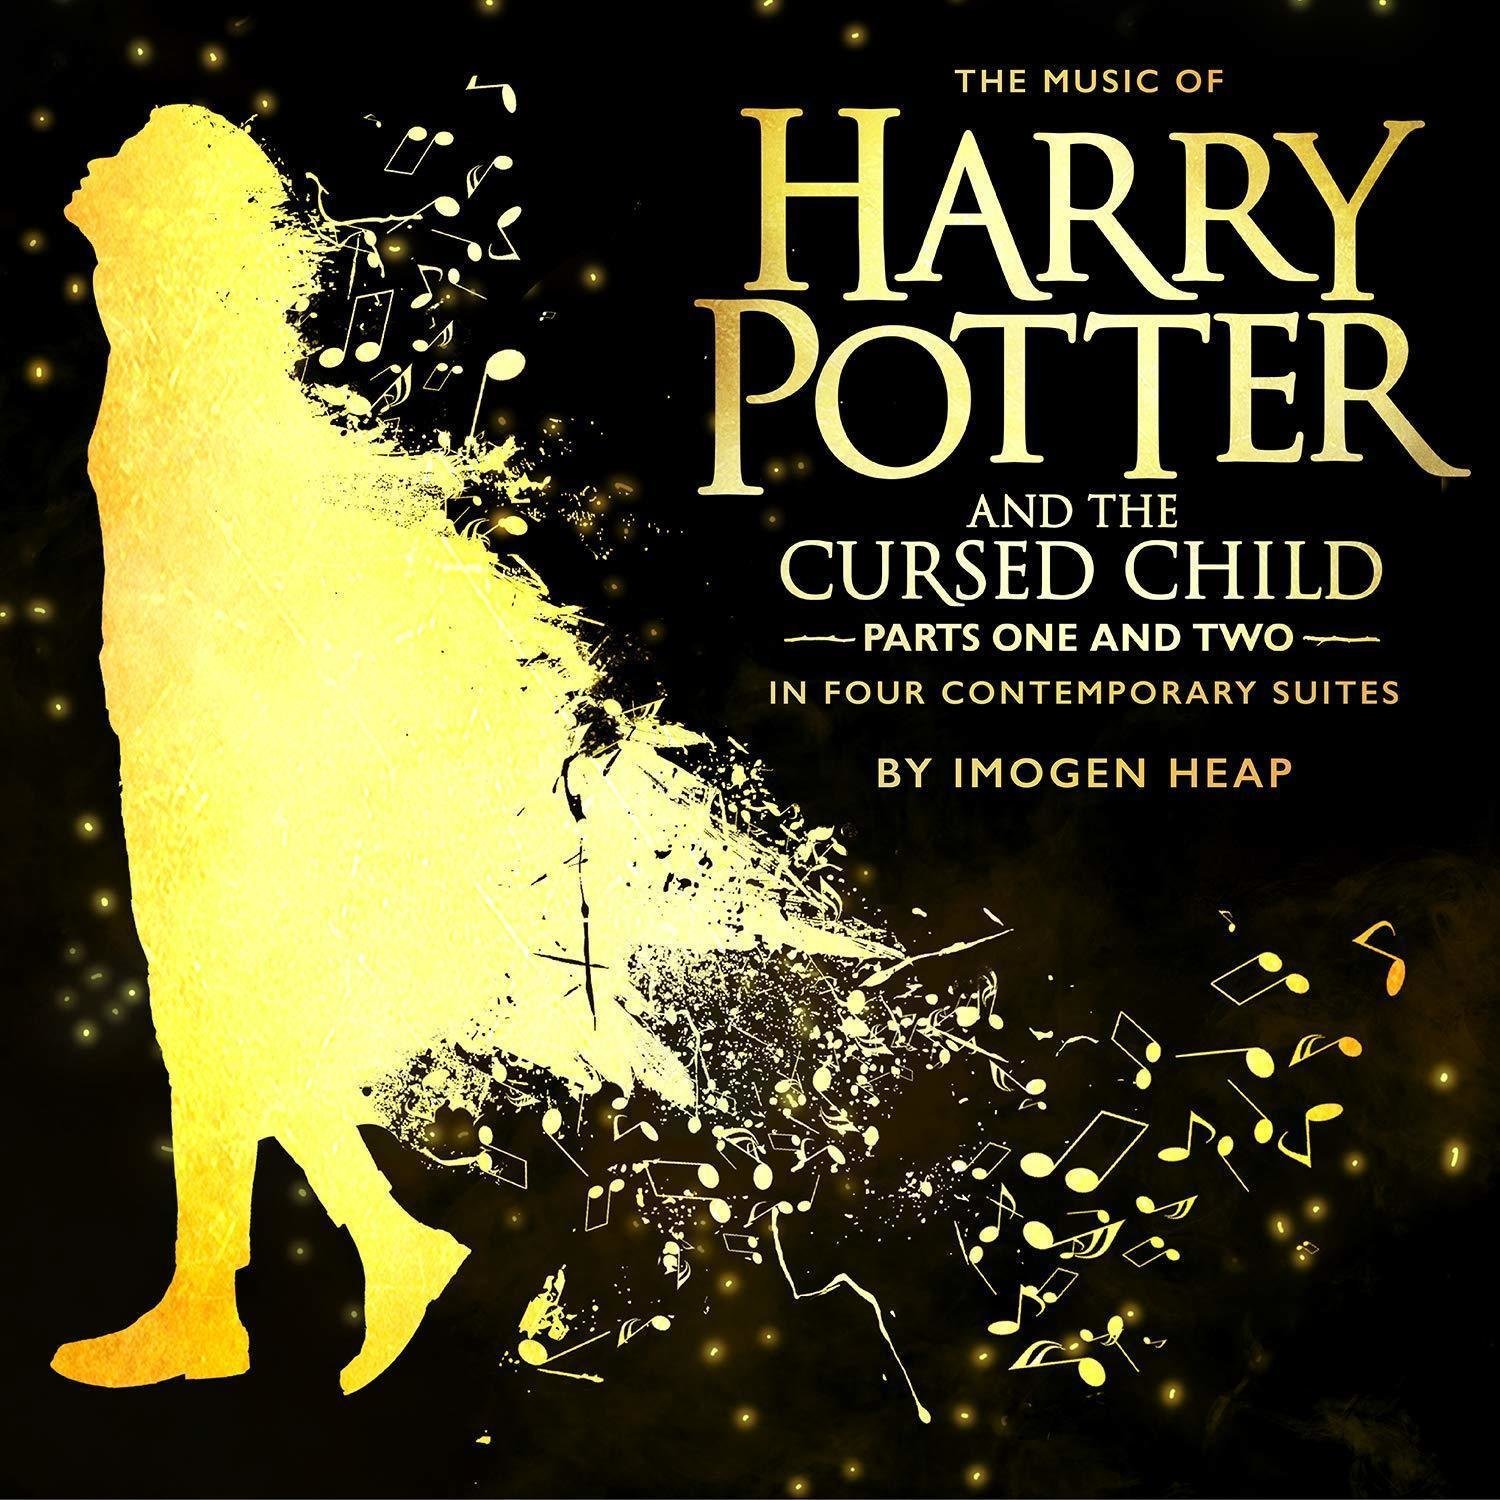 LP deska Imogen Heap Music of Harry Potter and the Cursed Child - In Four Contemporary Suites (2 LP)